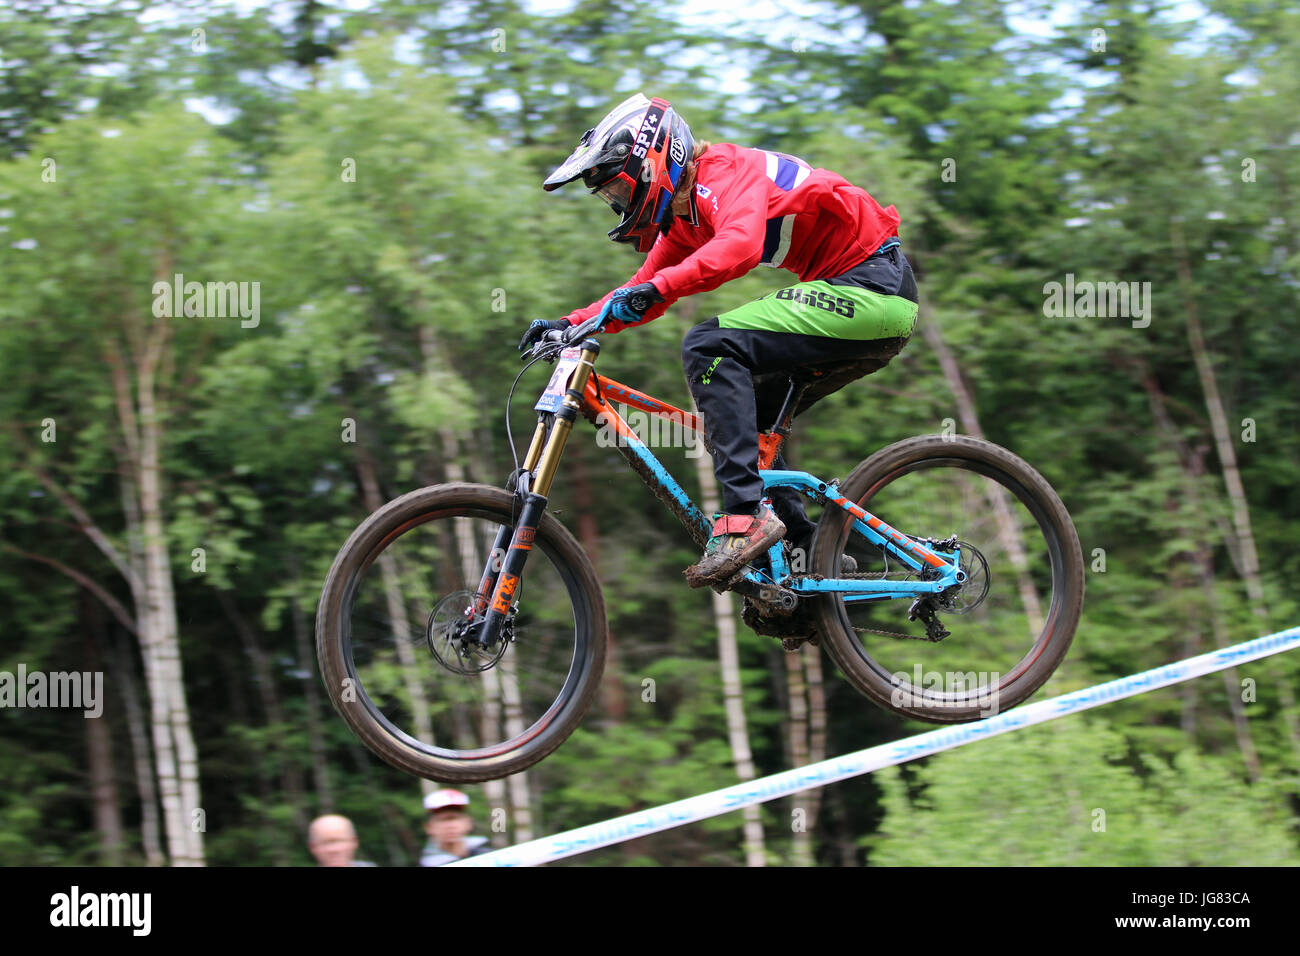 Fort William, Scotland. 4th June, 2017. Hilde Straedet at the Mountain Bike Downhill World Cup. Stock Photo